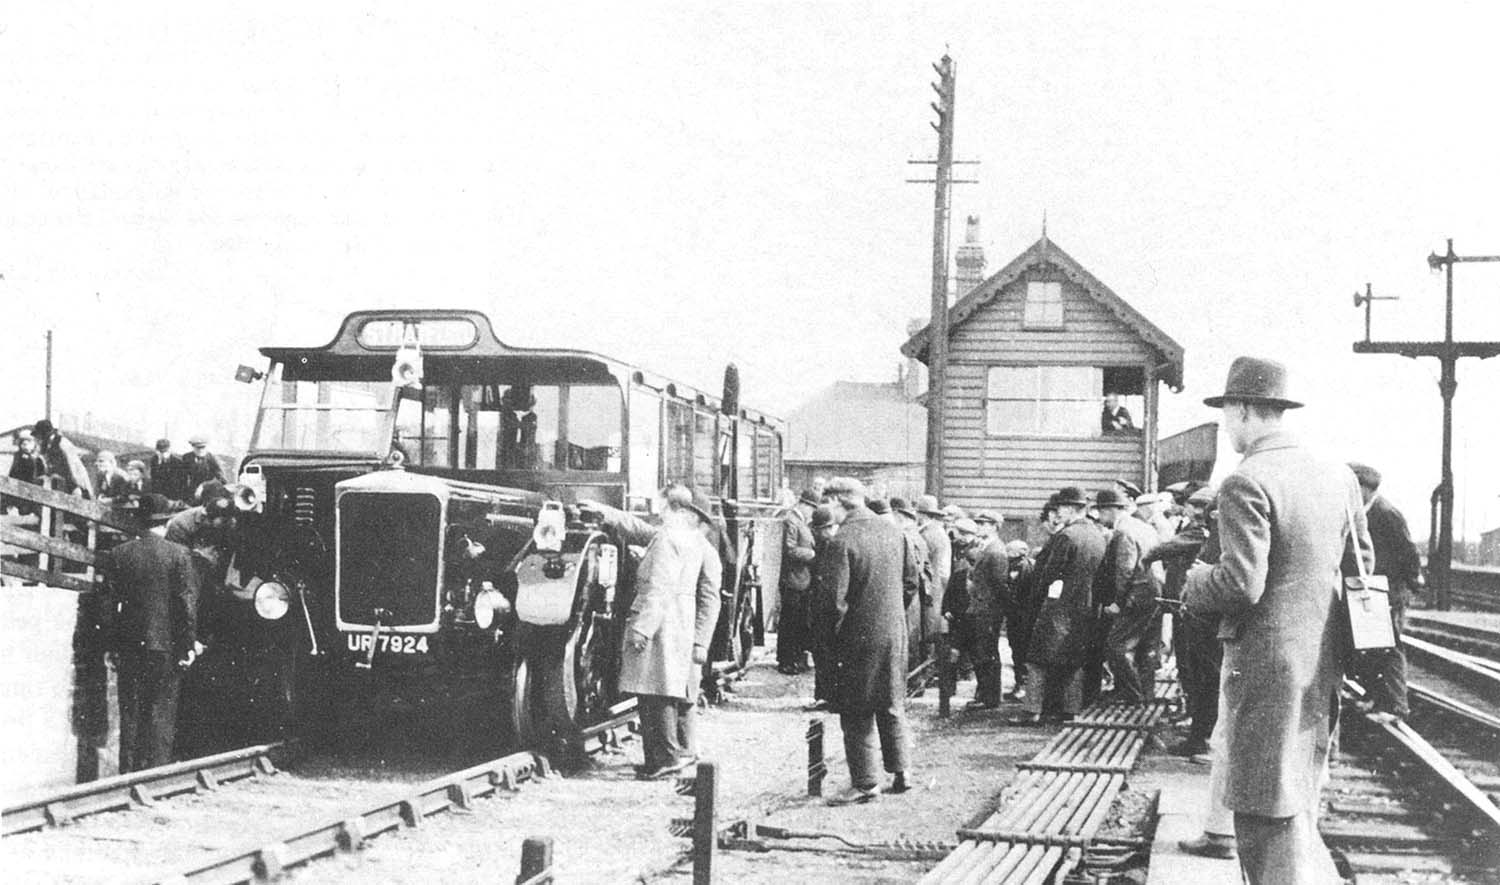 The Ro-Railer reverses off the railway on to road using the special ramp which lay adjacent to the cattle dock